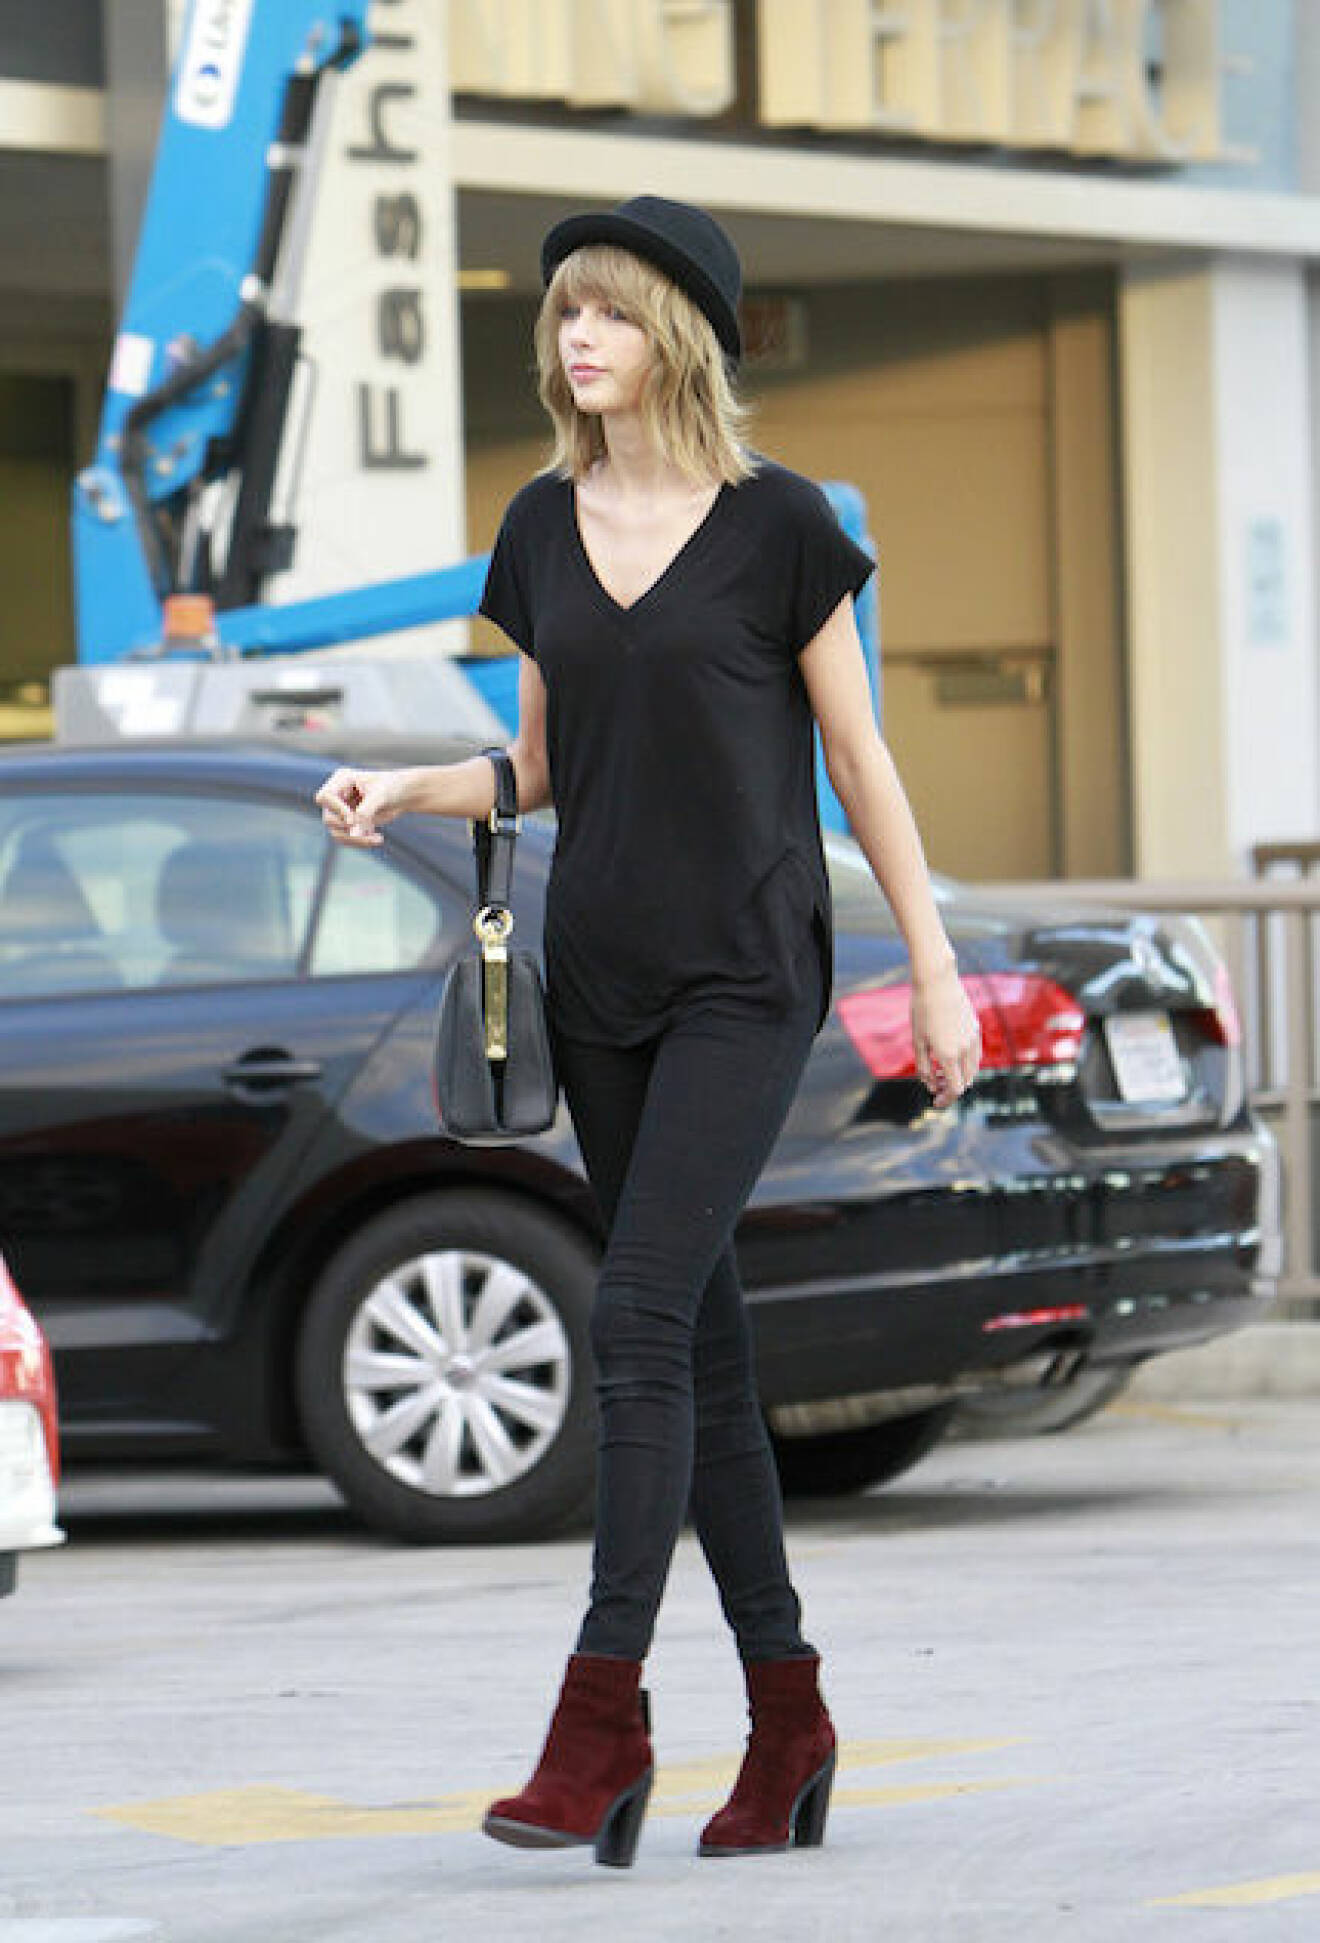 EXCLUSIVE: Taylor Swift pairs a bowler hat with an all black ensemble as she parades down the street carrying her designer purse while flanked by her two private security guards